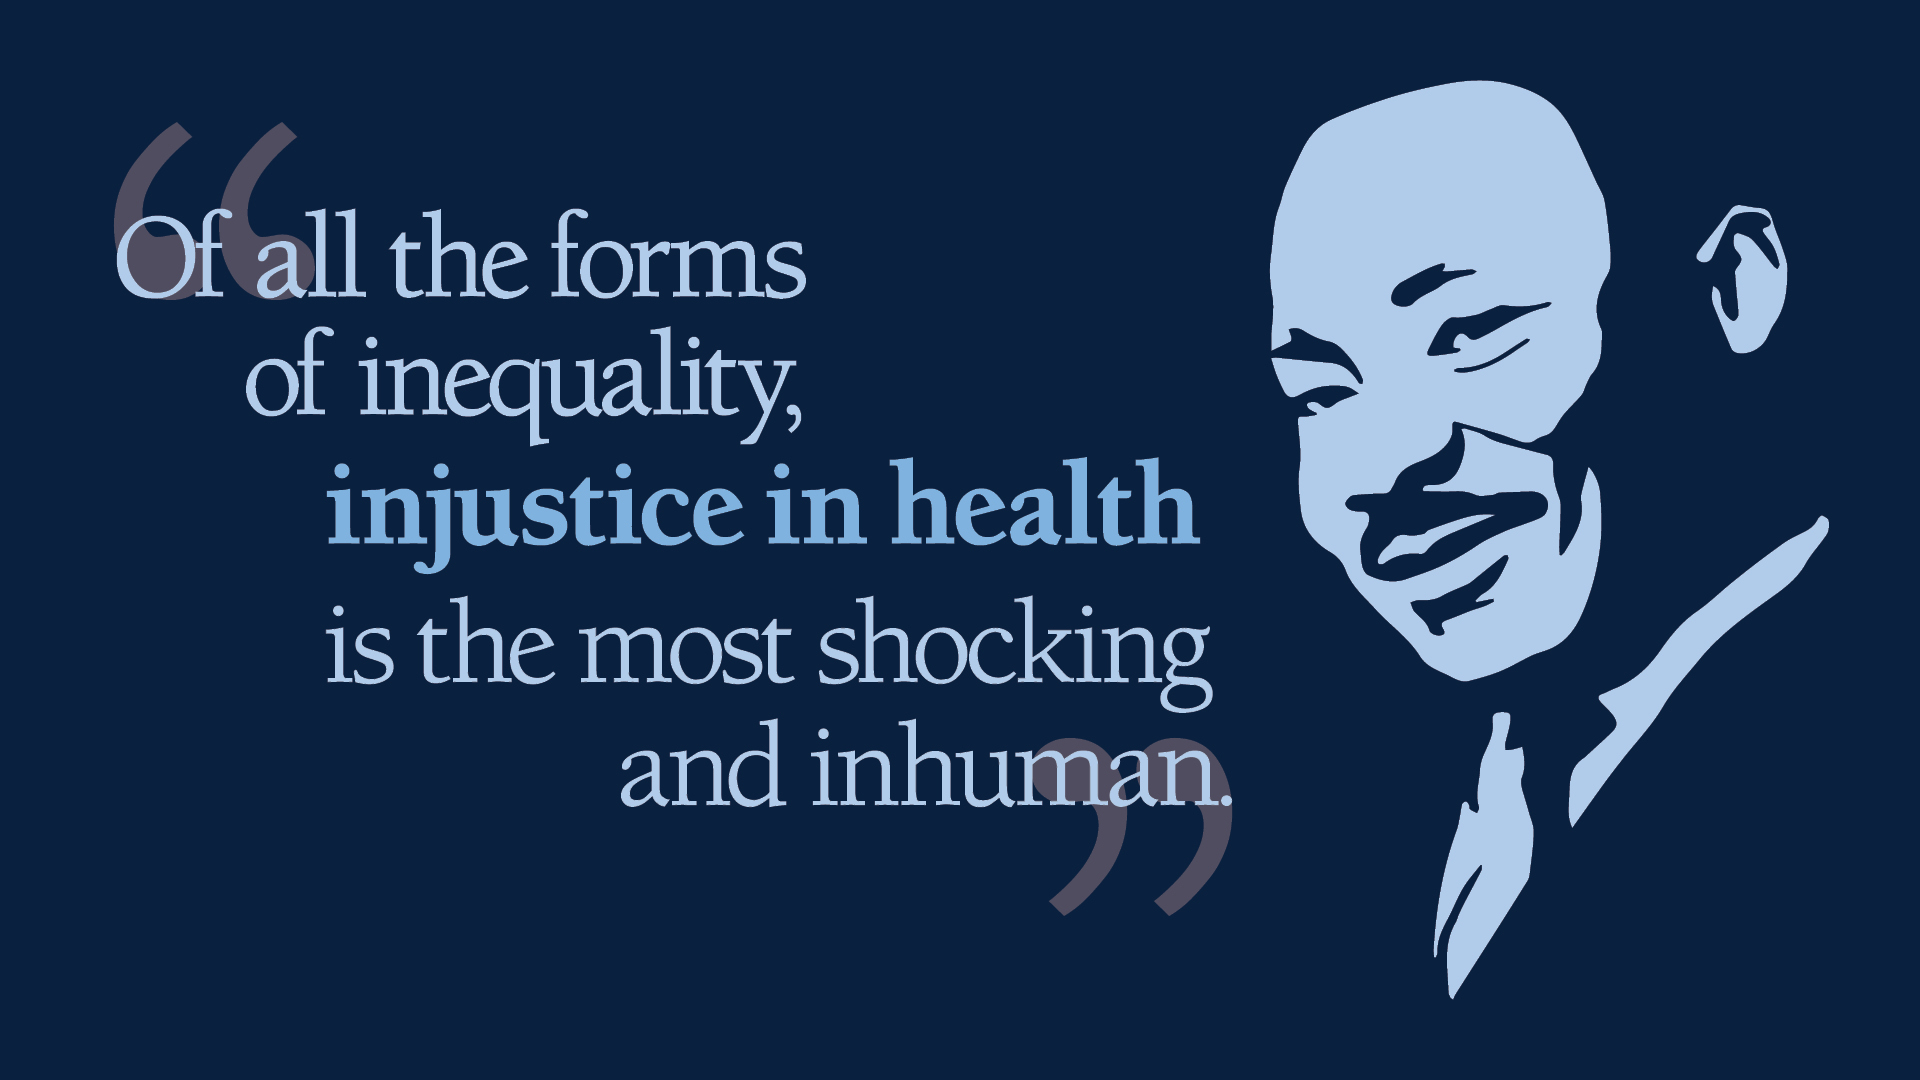 Of all the forms of inequality, injustice in health is the most shocking and inhuman